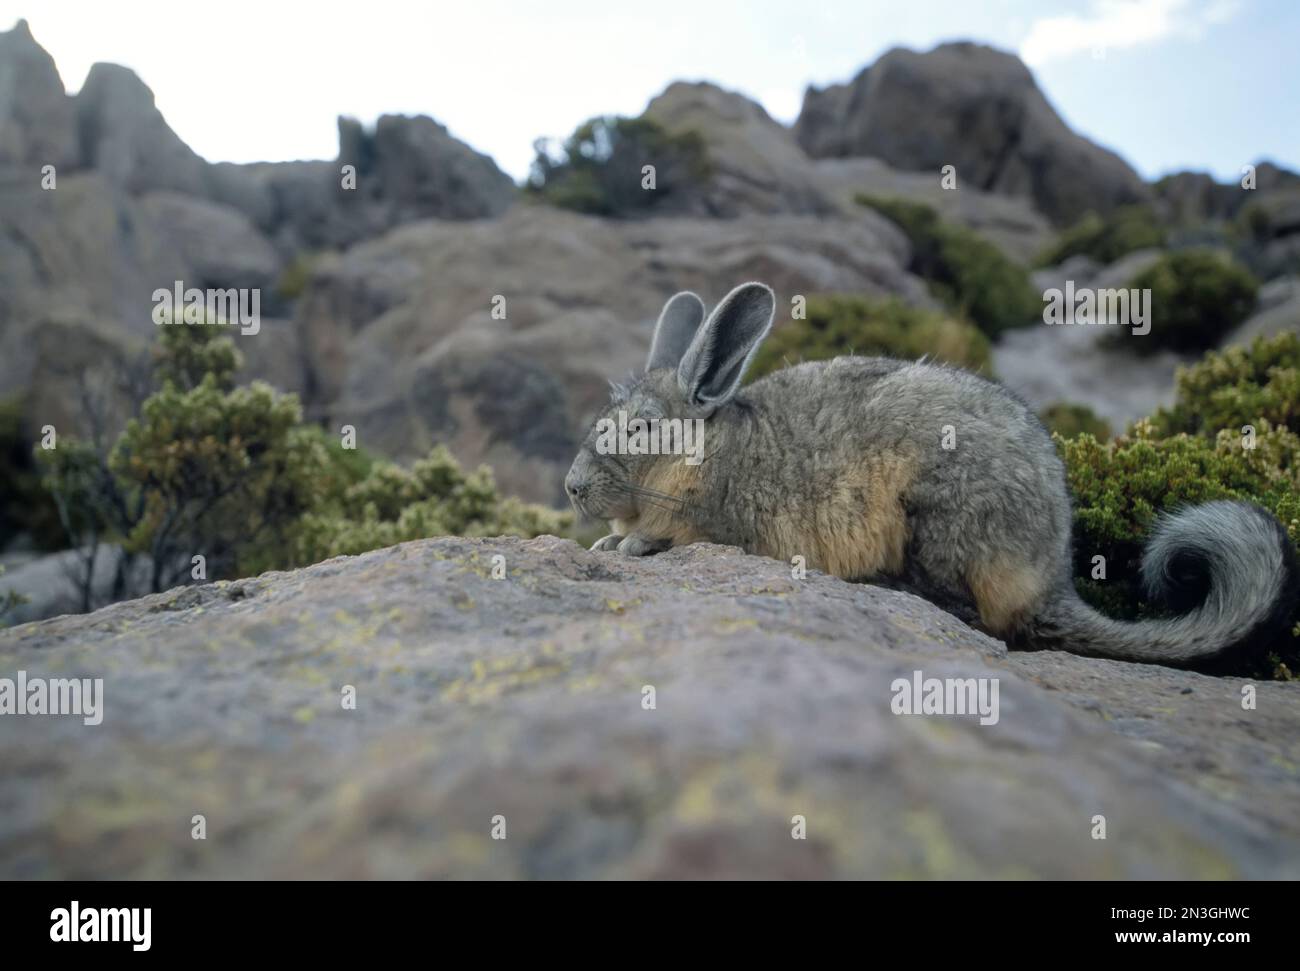 A herbivorous viscacha sits camouflaged on a rock, tail curled; Atacama Desert, Chile Stock Photo